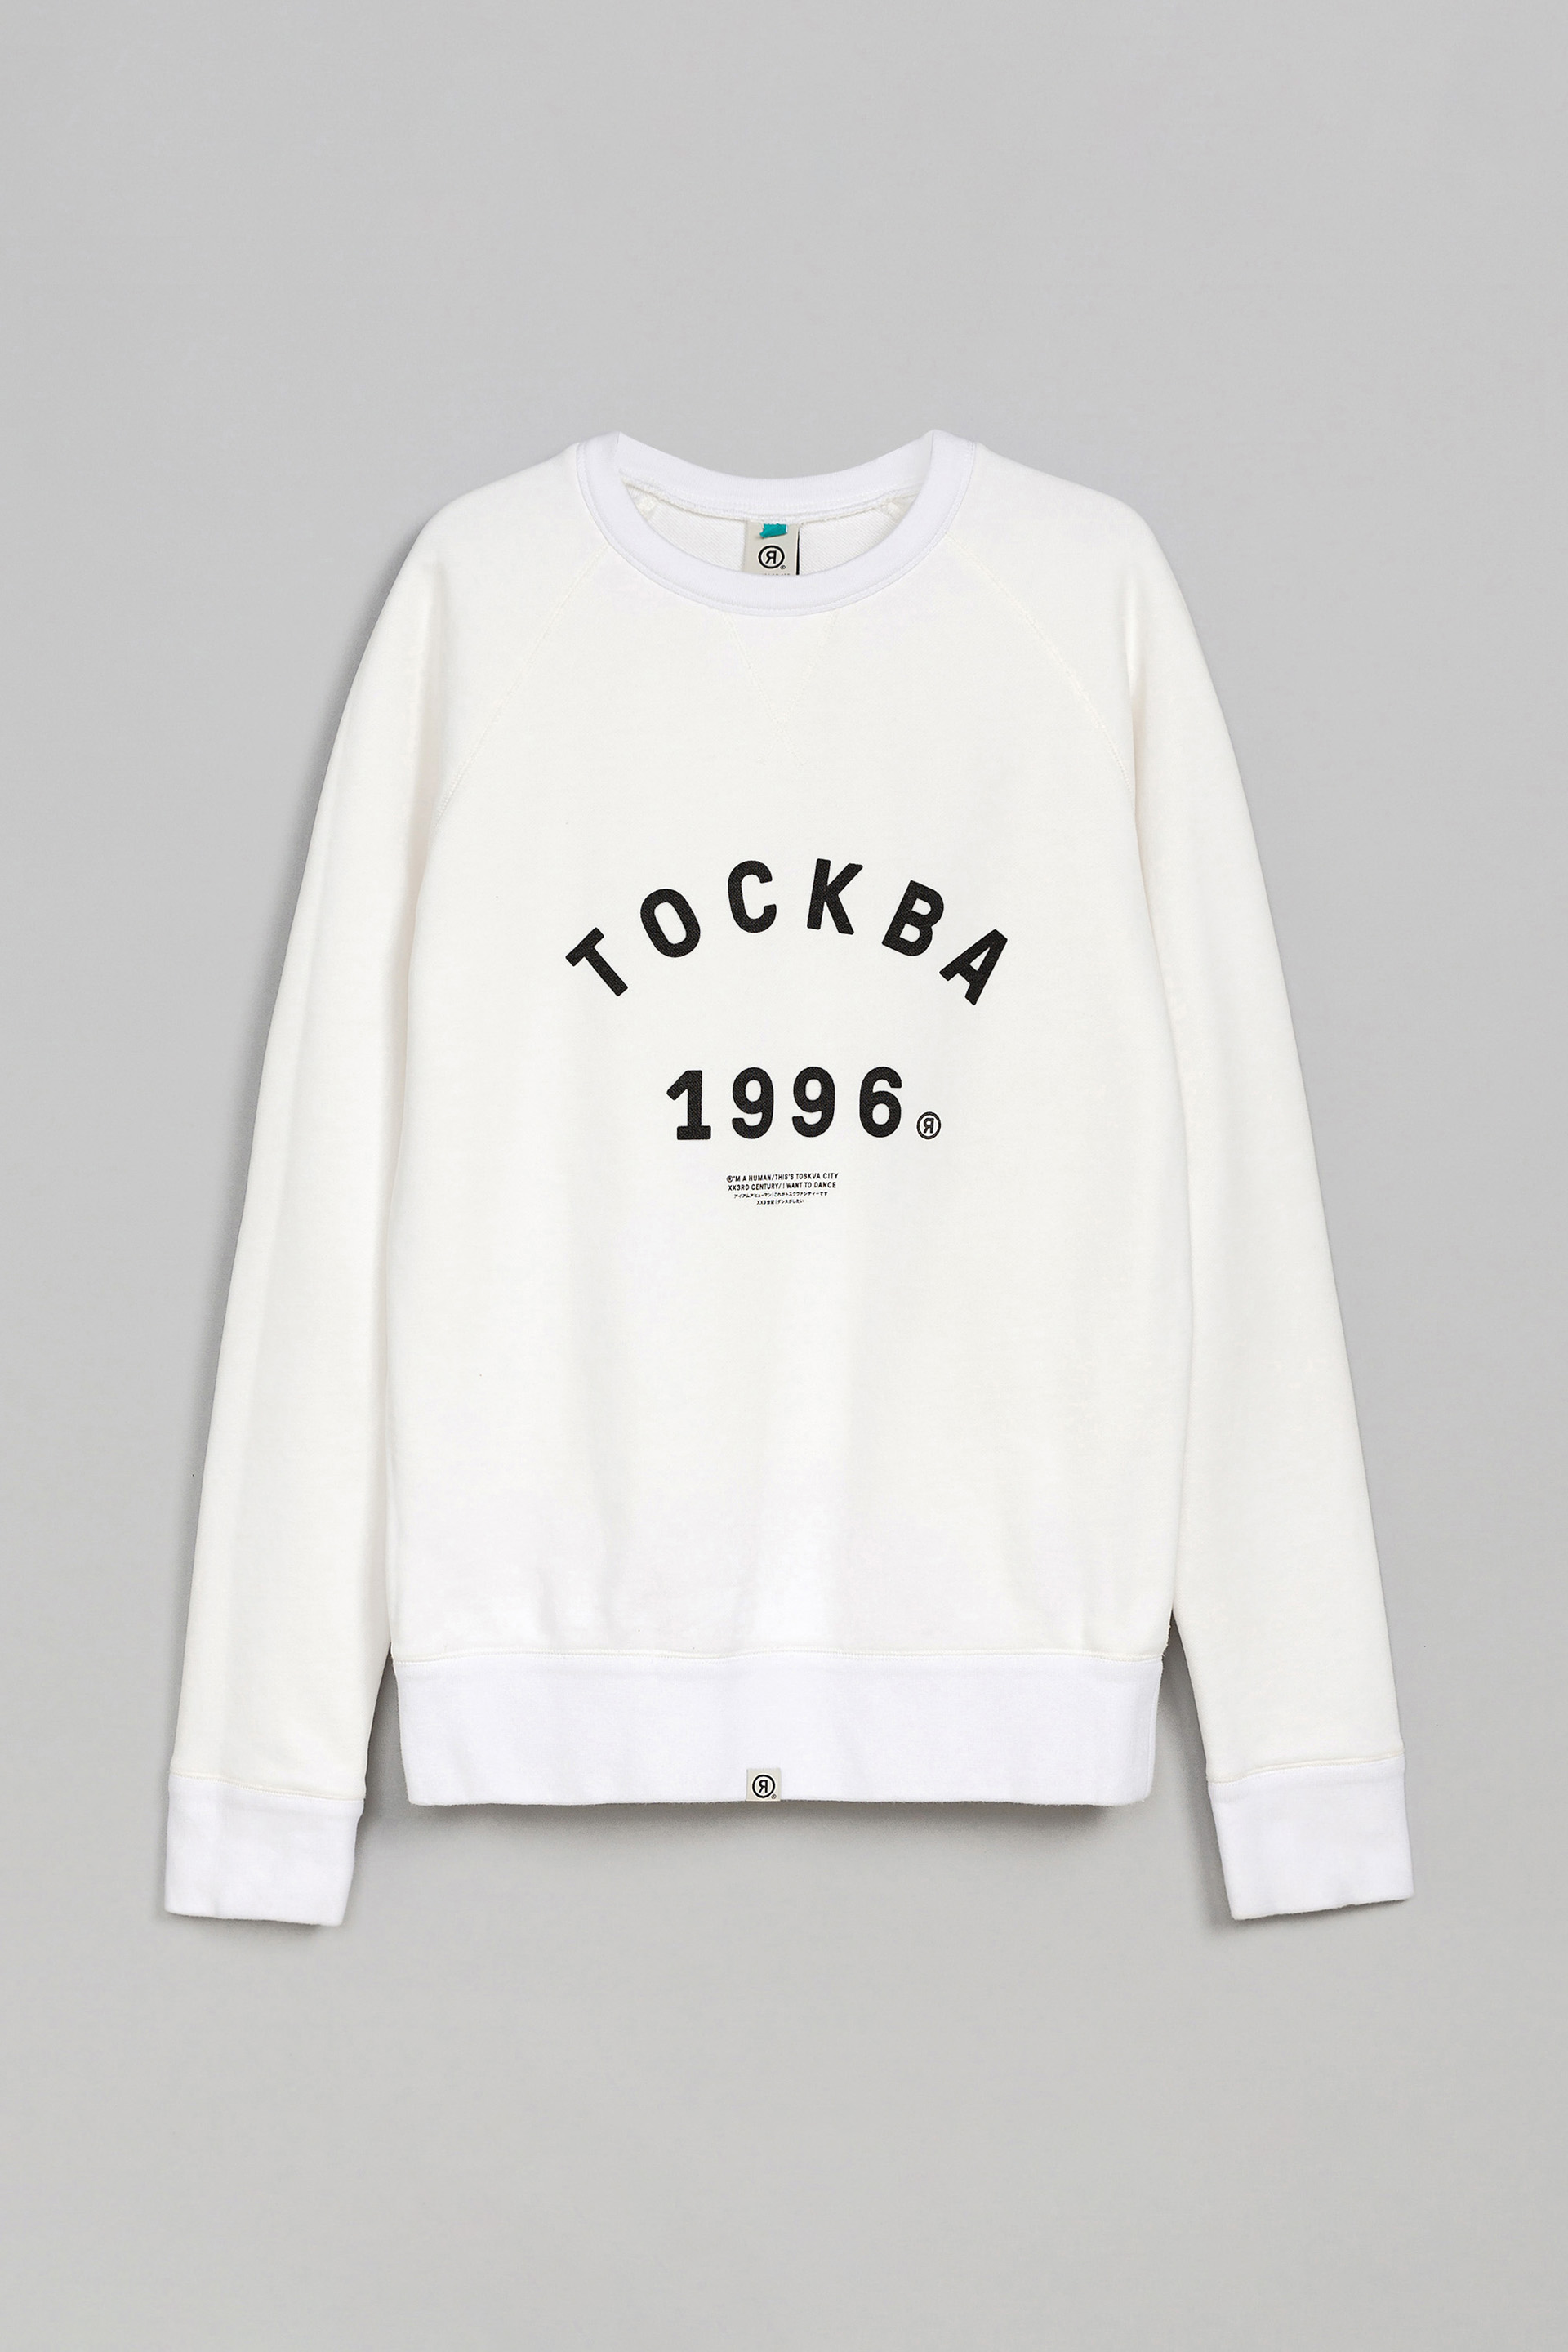 These Clothes have own philosophy and character – TOSKVA1996